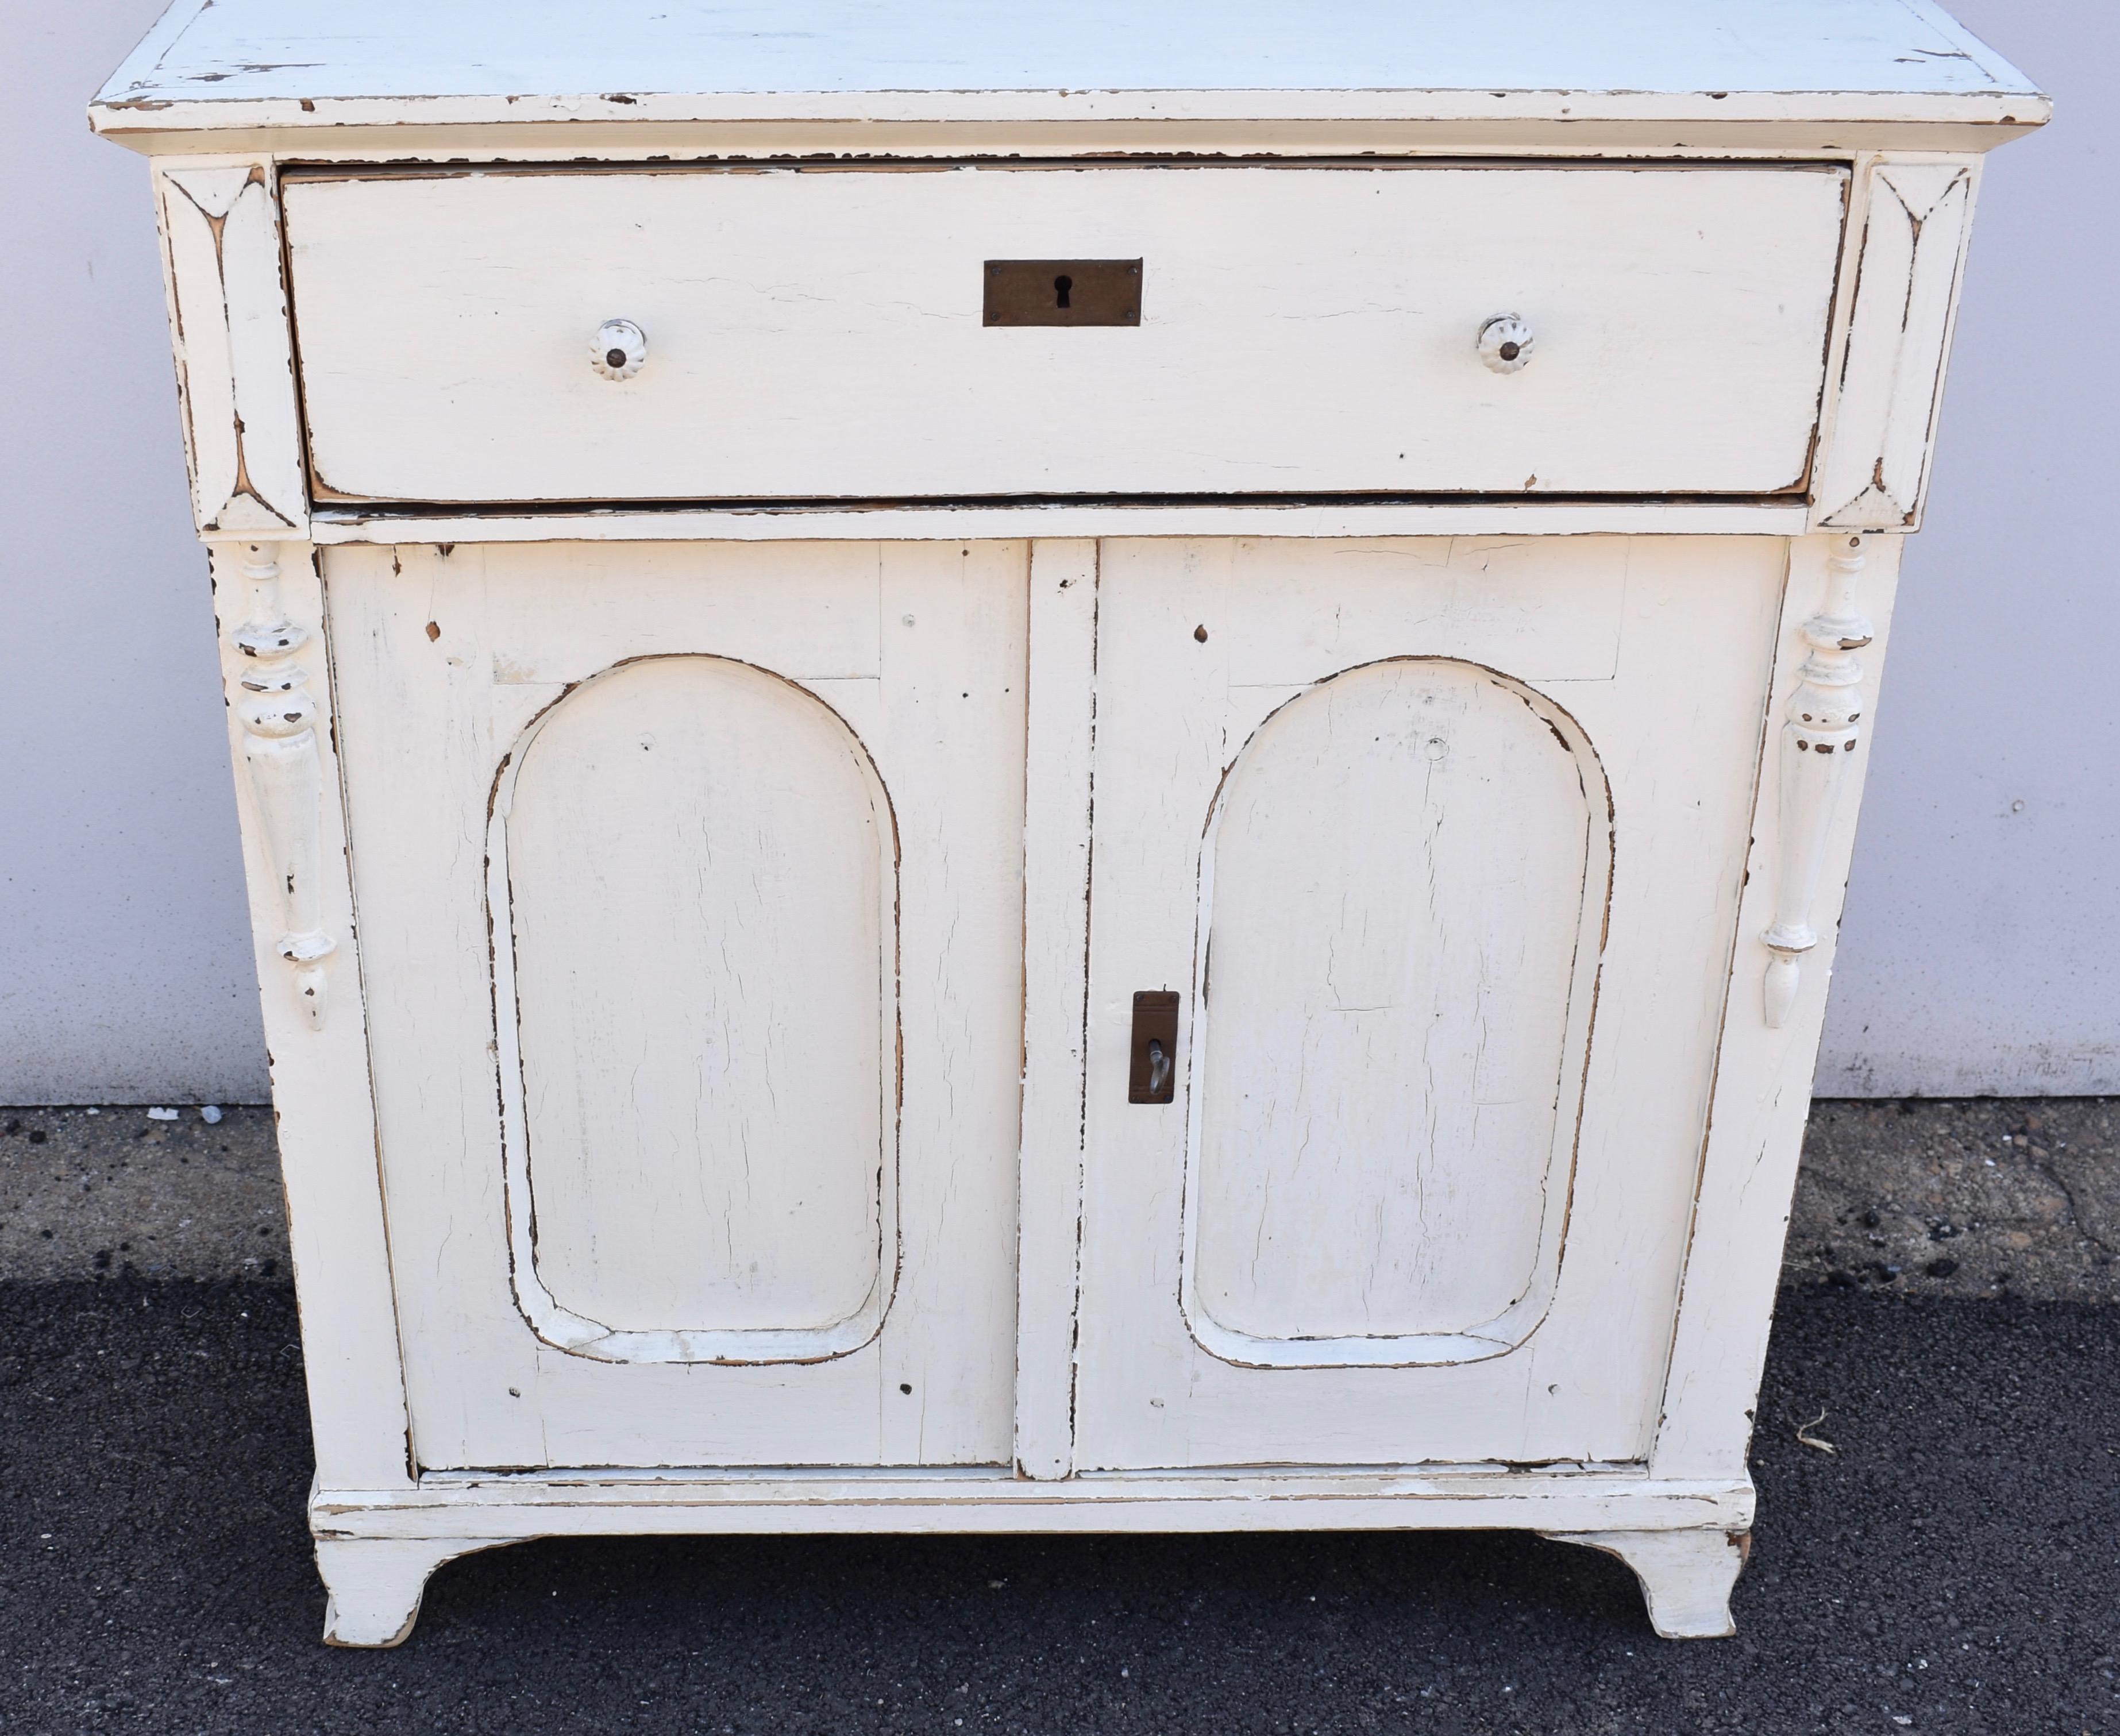 This unusually shallow painted dresser base has such a lovely form.  The top is flat with a plain crown molding.  There is a single deep hand-cut dovetailed drawer above two doors with arched top flat panels.  The front corners have a long pyramid